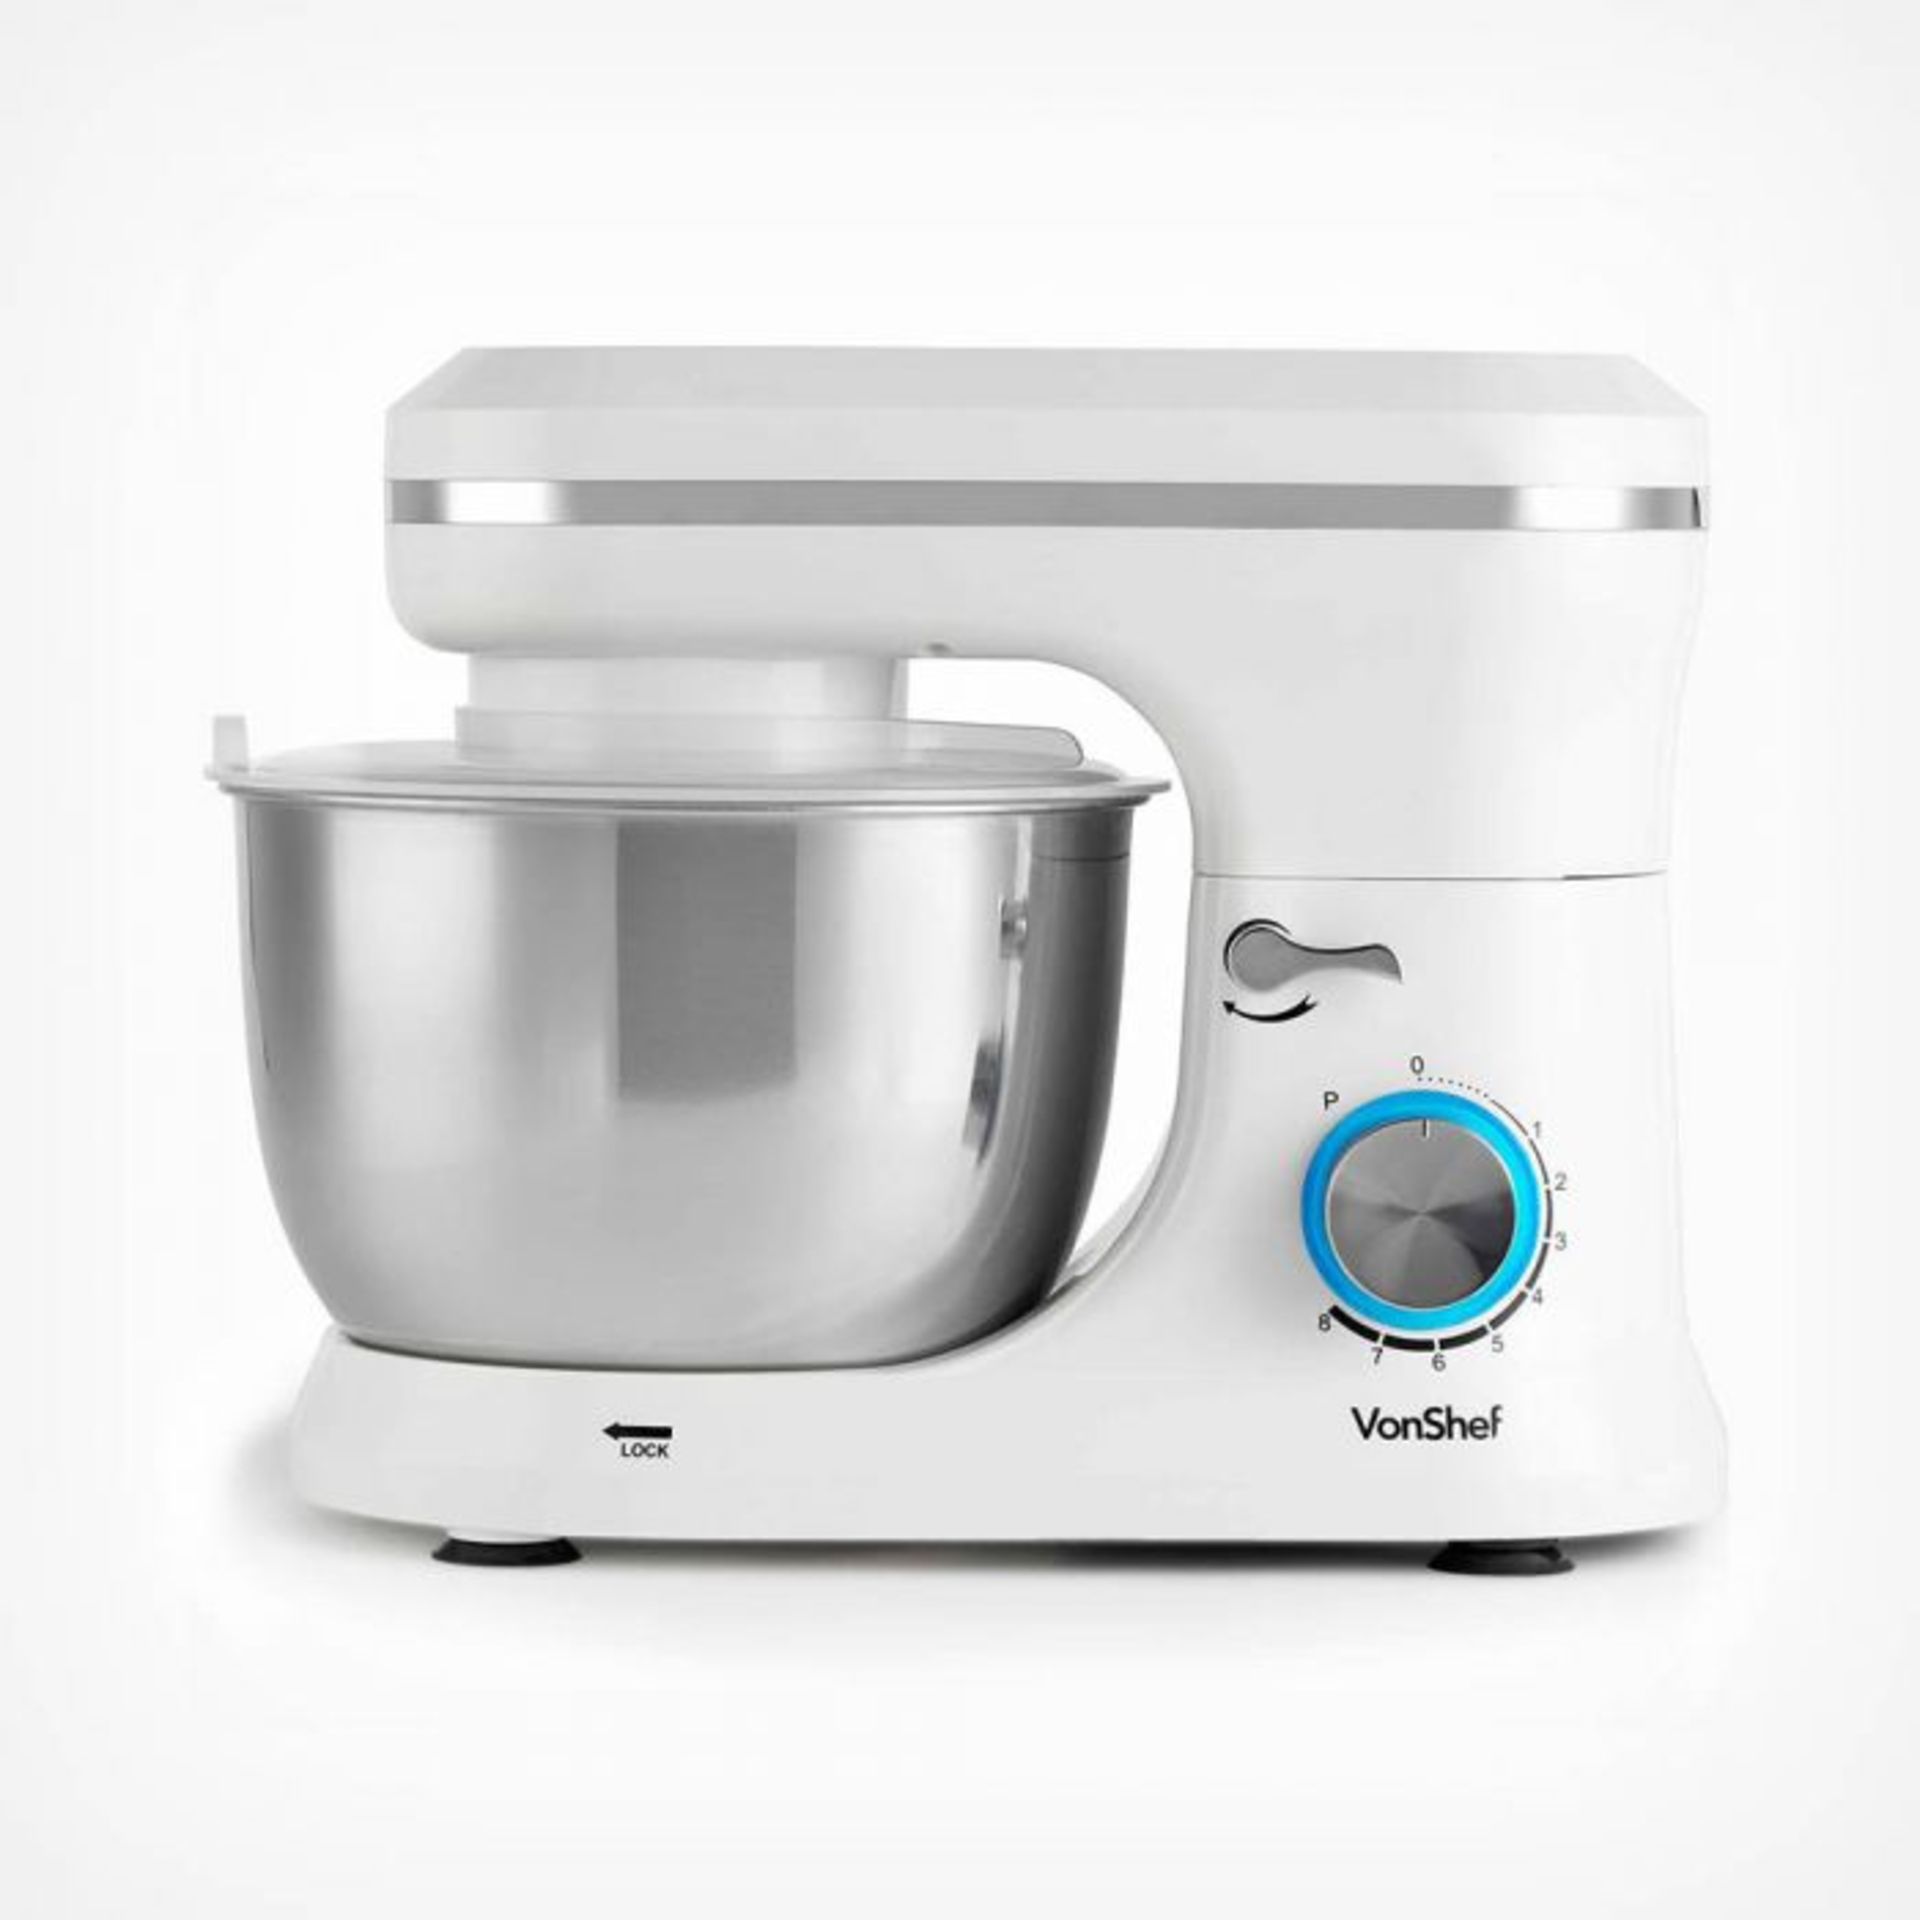 (S100) 1000W Cream Stand Mixer Choose from 8 speed settings & a pulse function, whatever best ... - Image 2 of 3